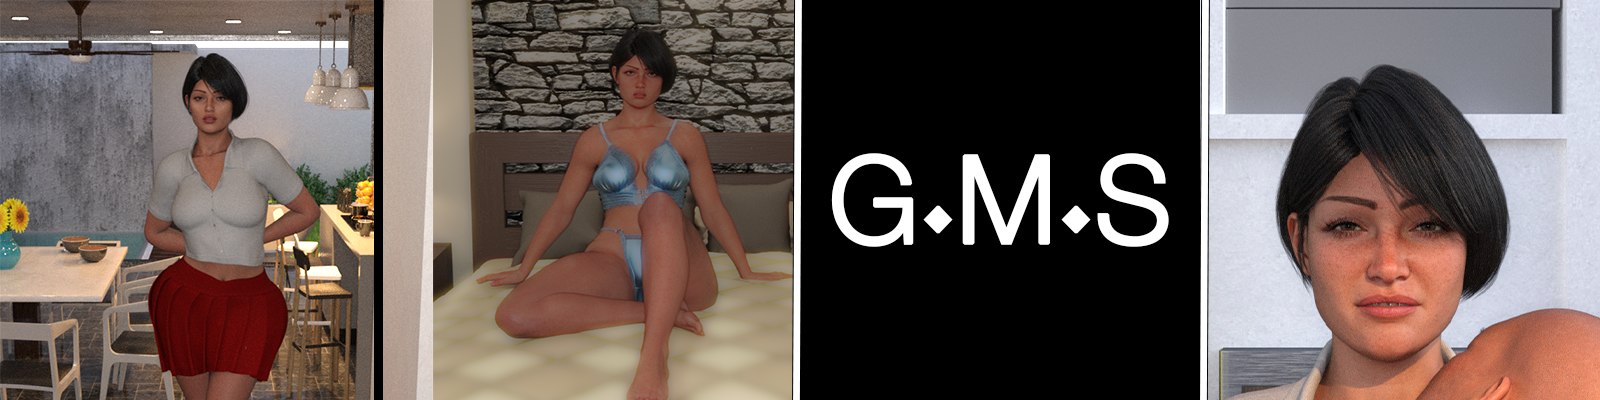 Milf Story [GMStore G.M.S] Adult xxx Game Download